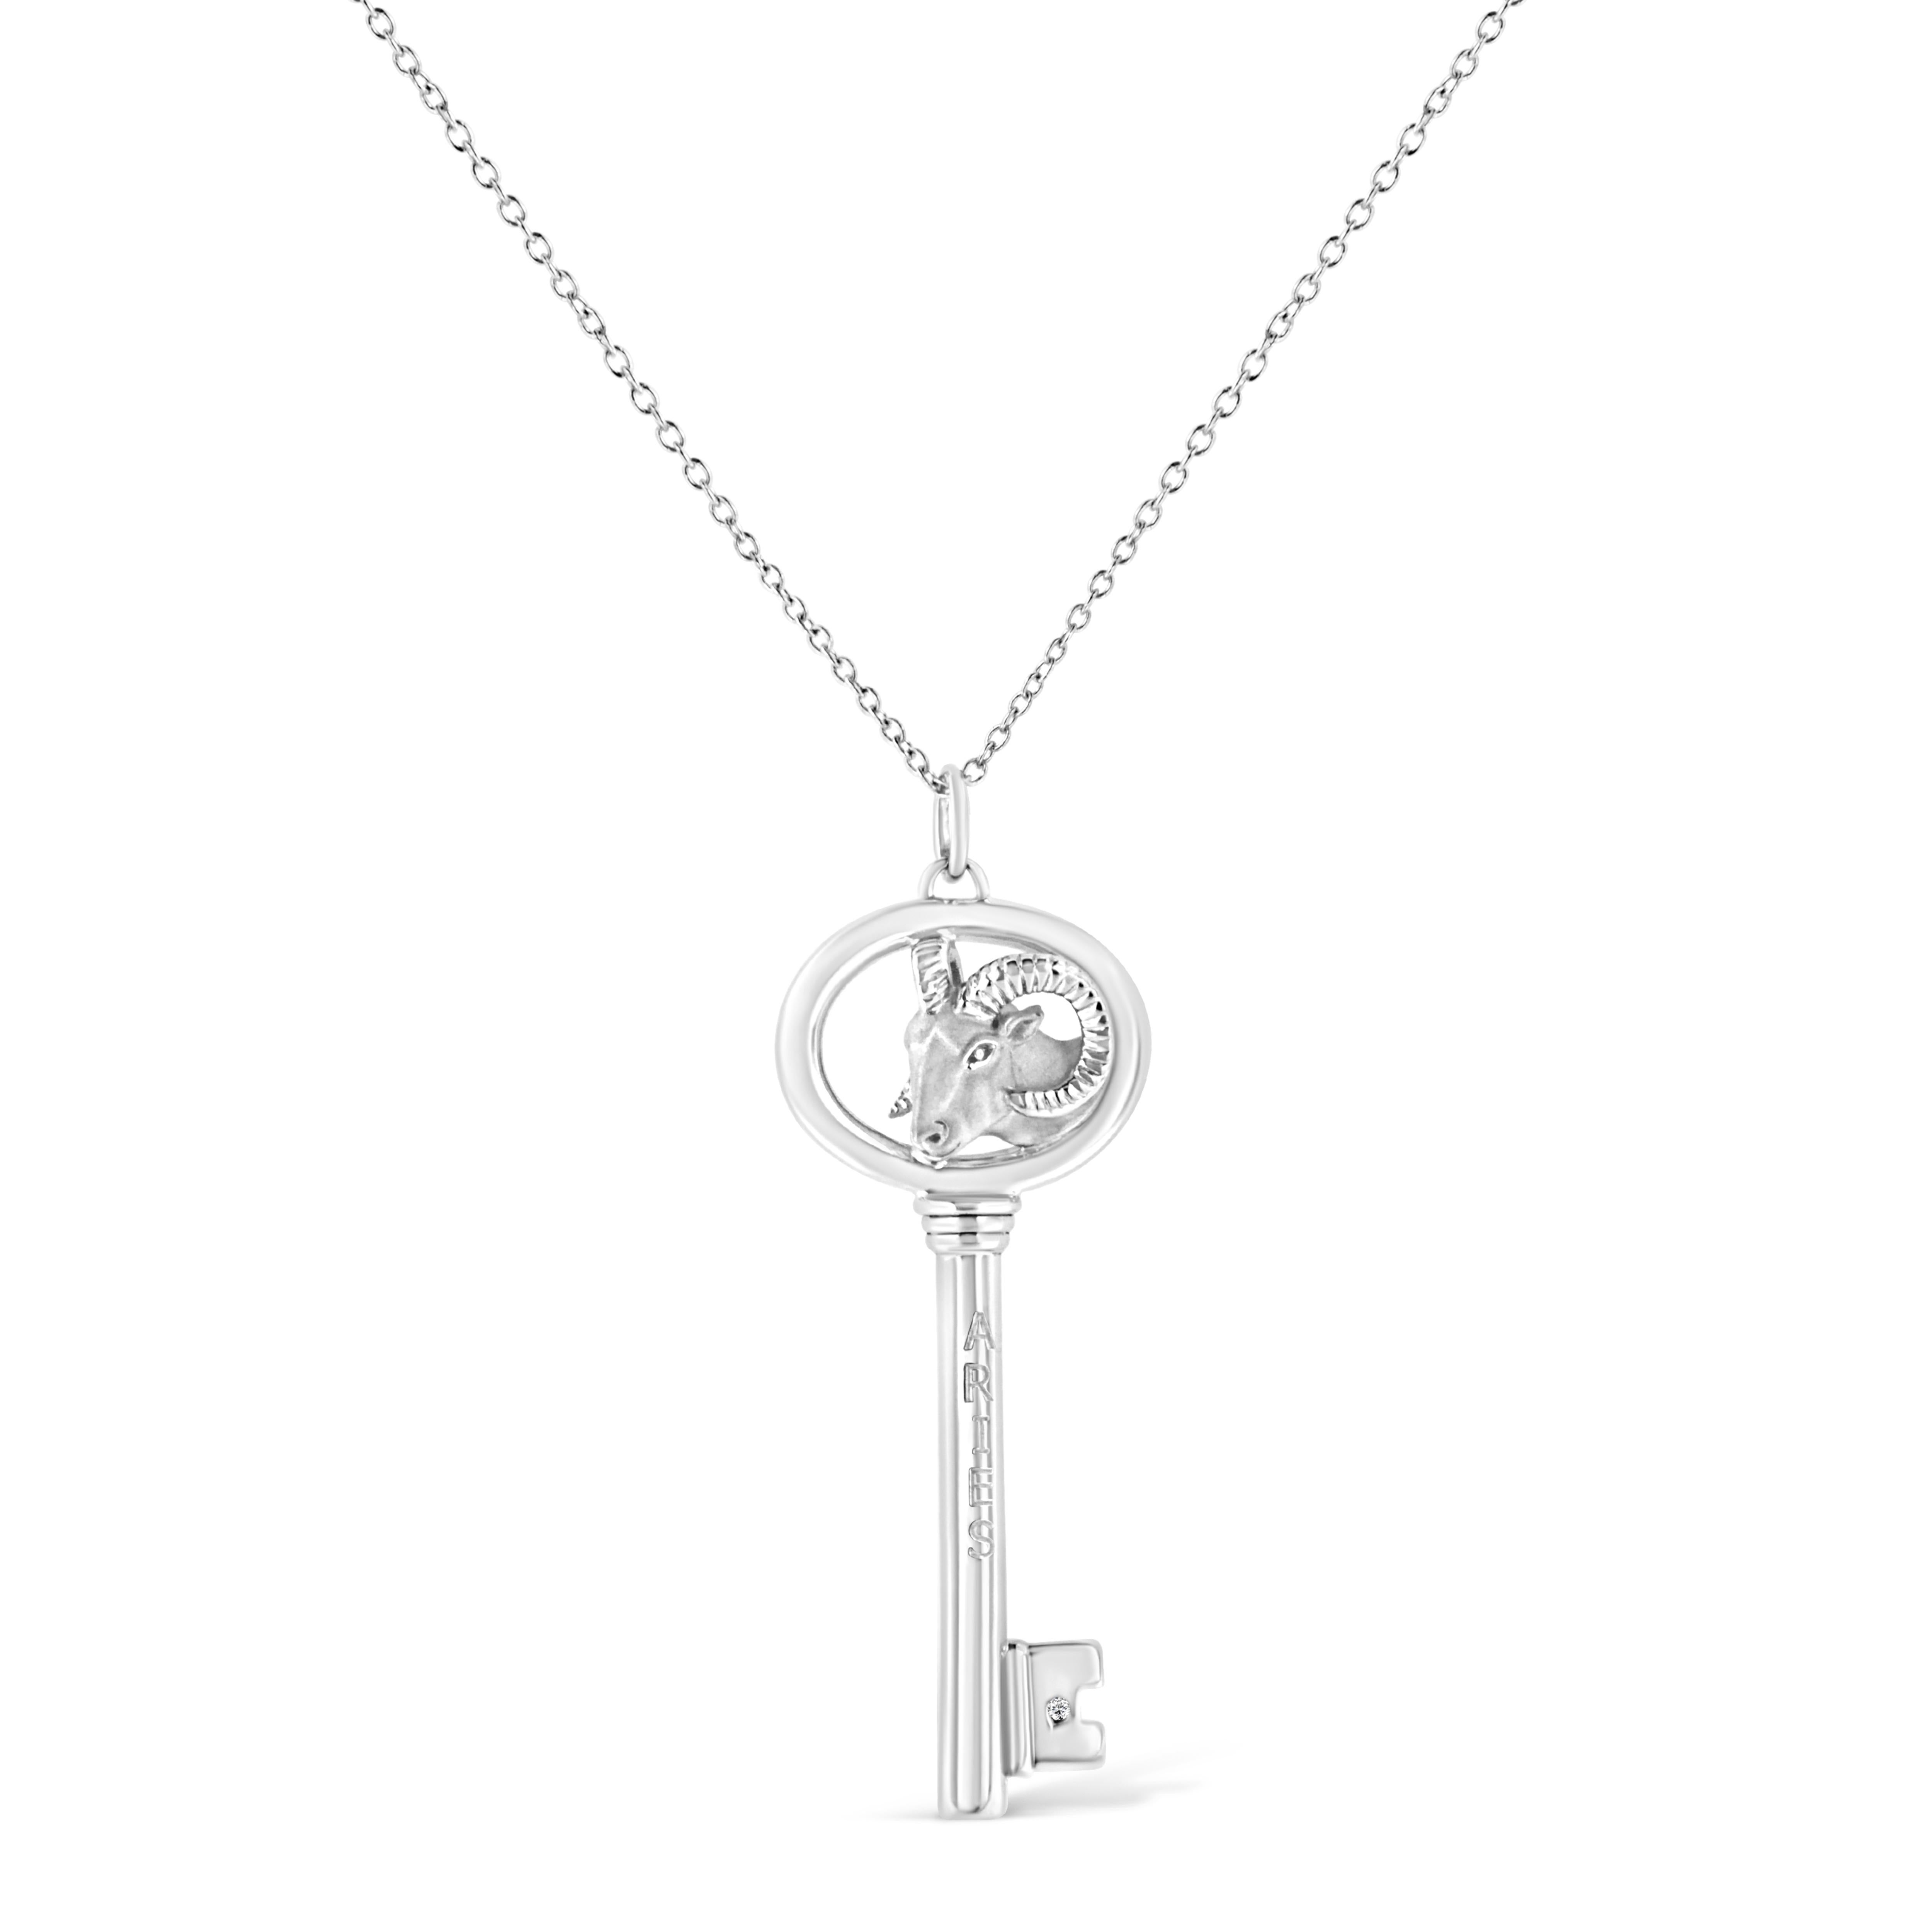 It's as if the stars aligned to create this stunning .925 Sterling Silver necklace flaunting an Aries zodiac pendant accented by a glimmering bezel set natural diamond. Brilliant beacons of optimism and hope, our Zodiac Keys are radiant symbols of a